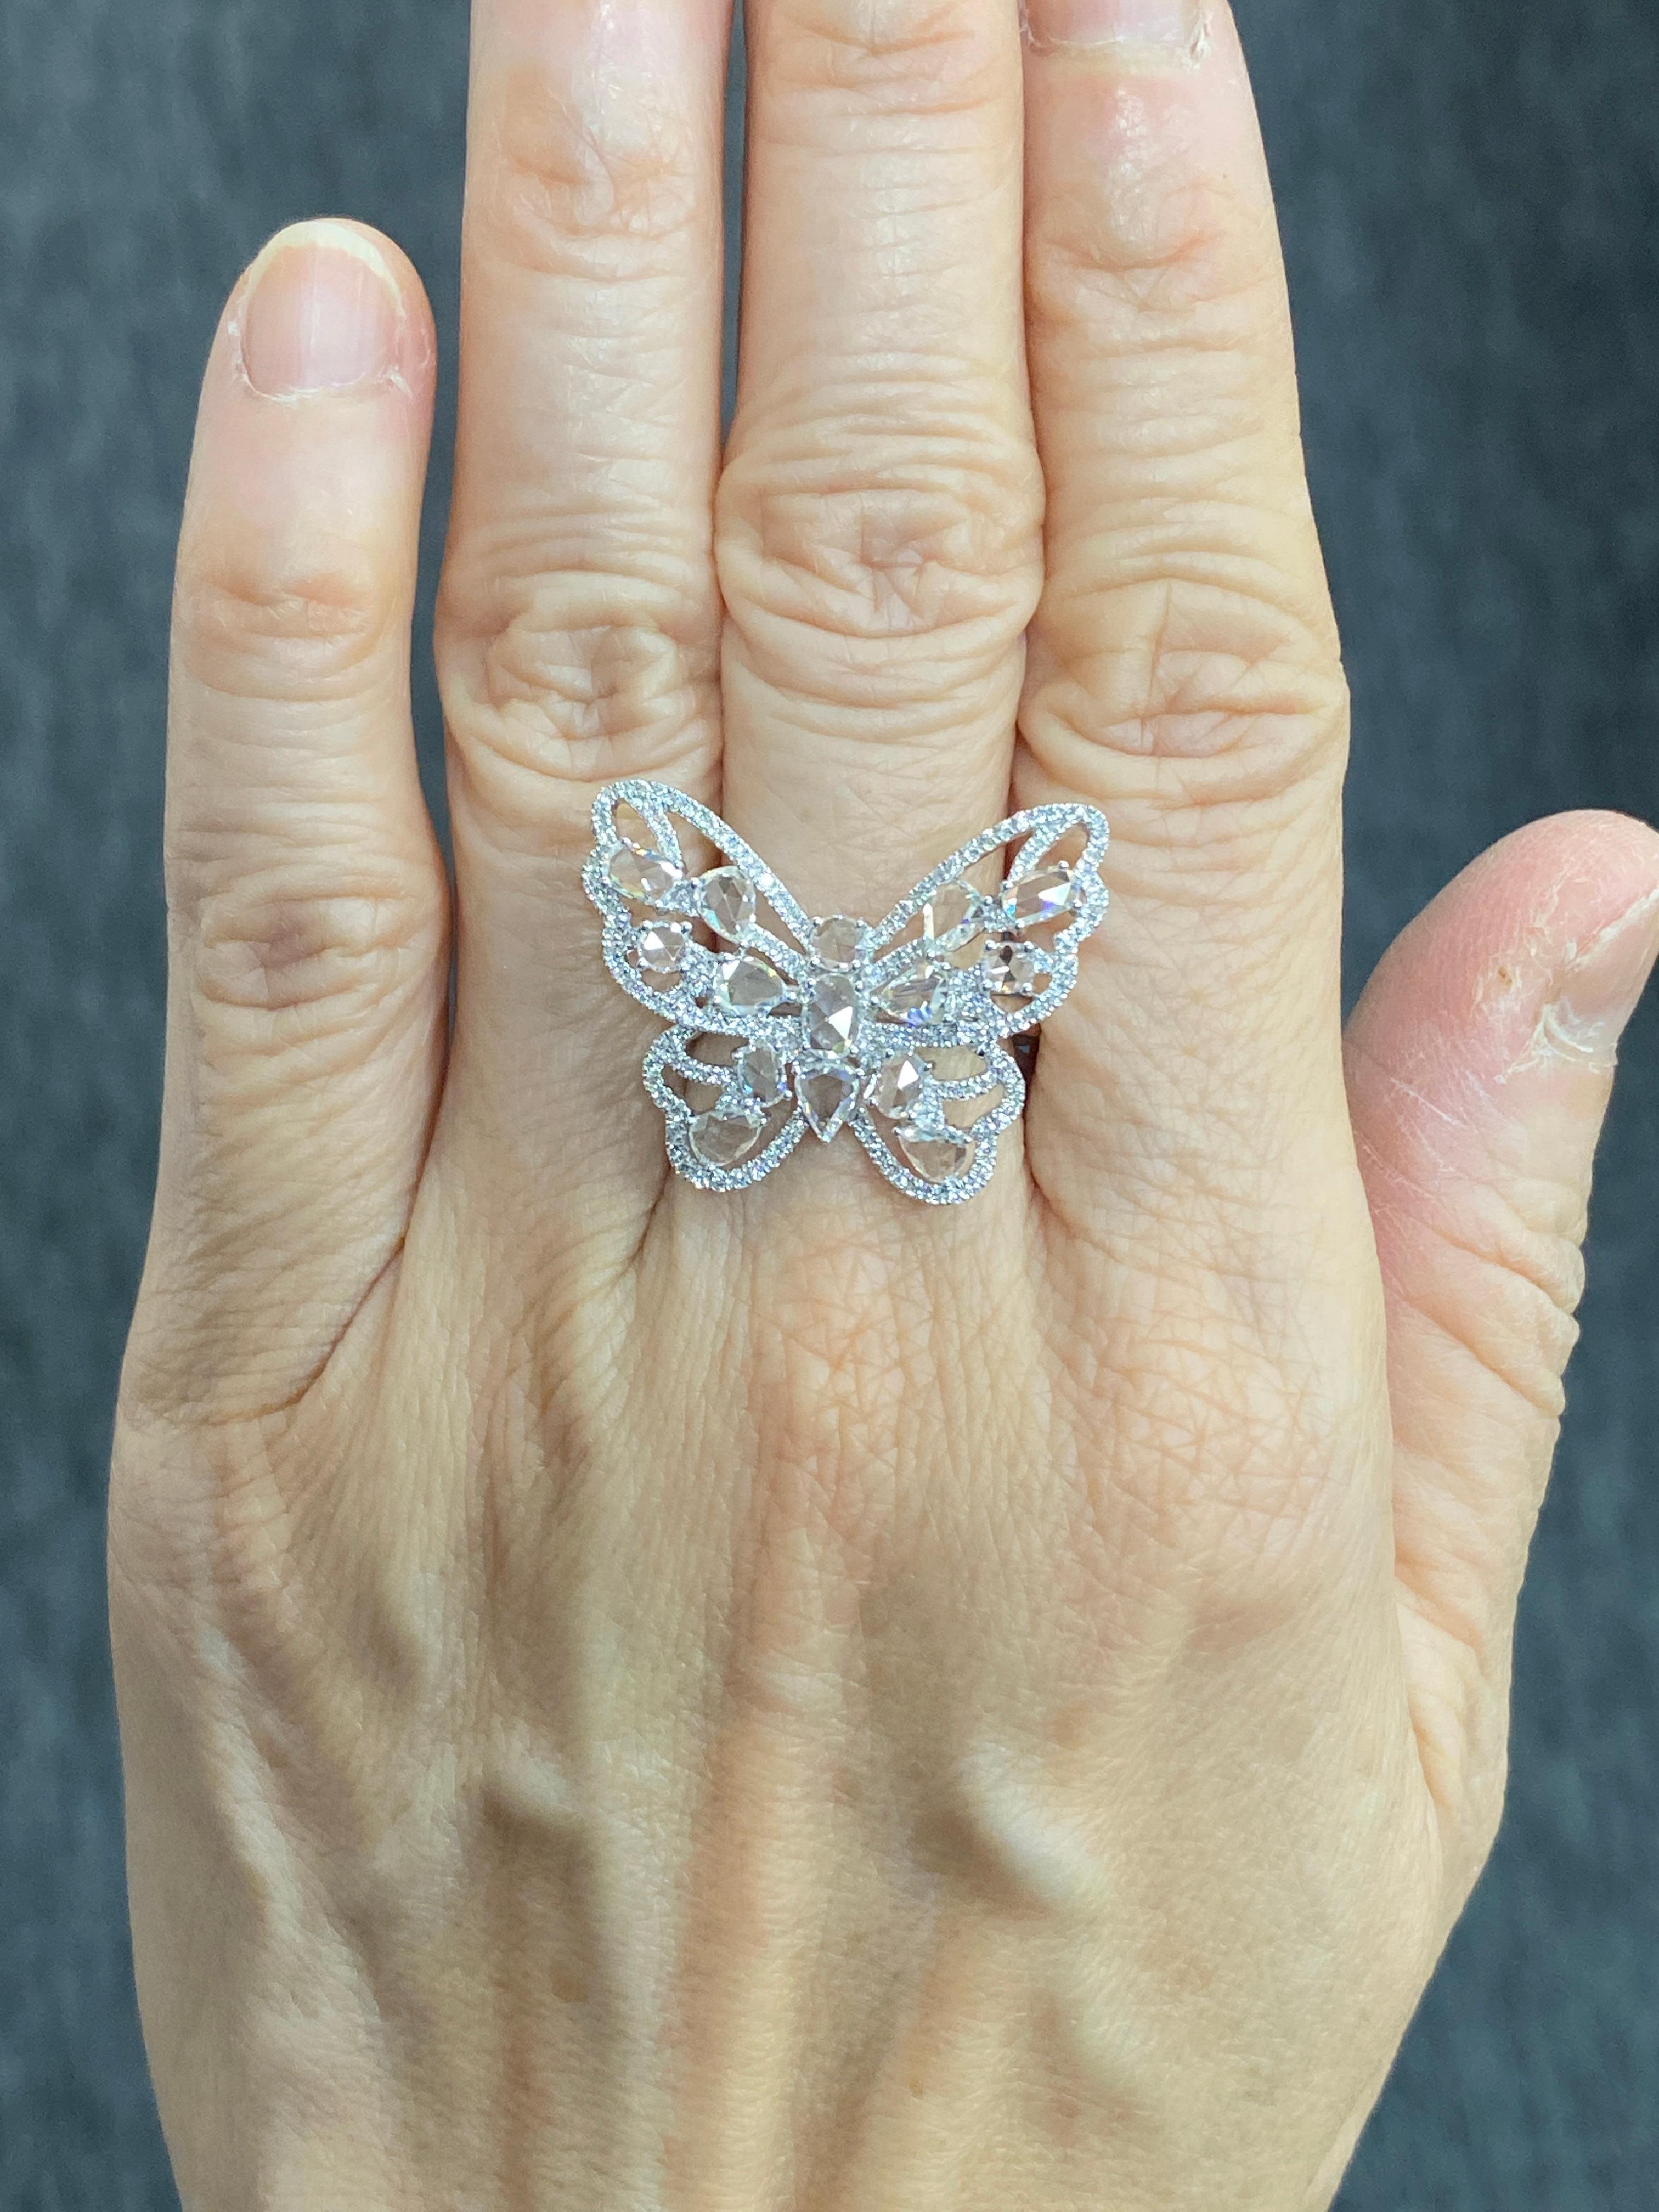 JR Rose Cut Butter Fly 18 Karat White Gold Ring

A delicate Butterfly Ring with Rose-cut diamonds.  The shape of these Rings is unique and beautiful. This luminous beauty will be a great addition of Jewelry collection.

Ring Size : Europe 54 ( US